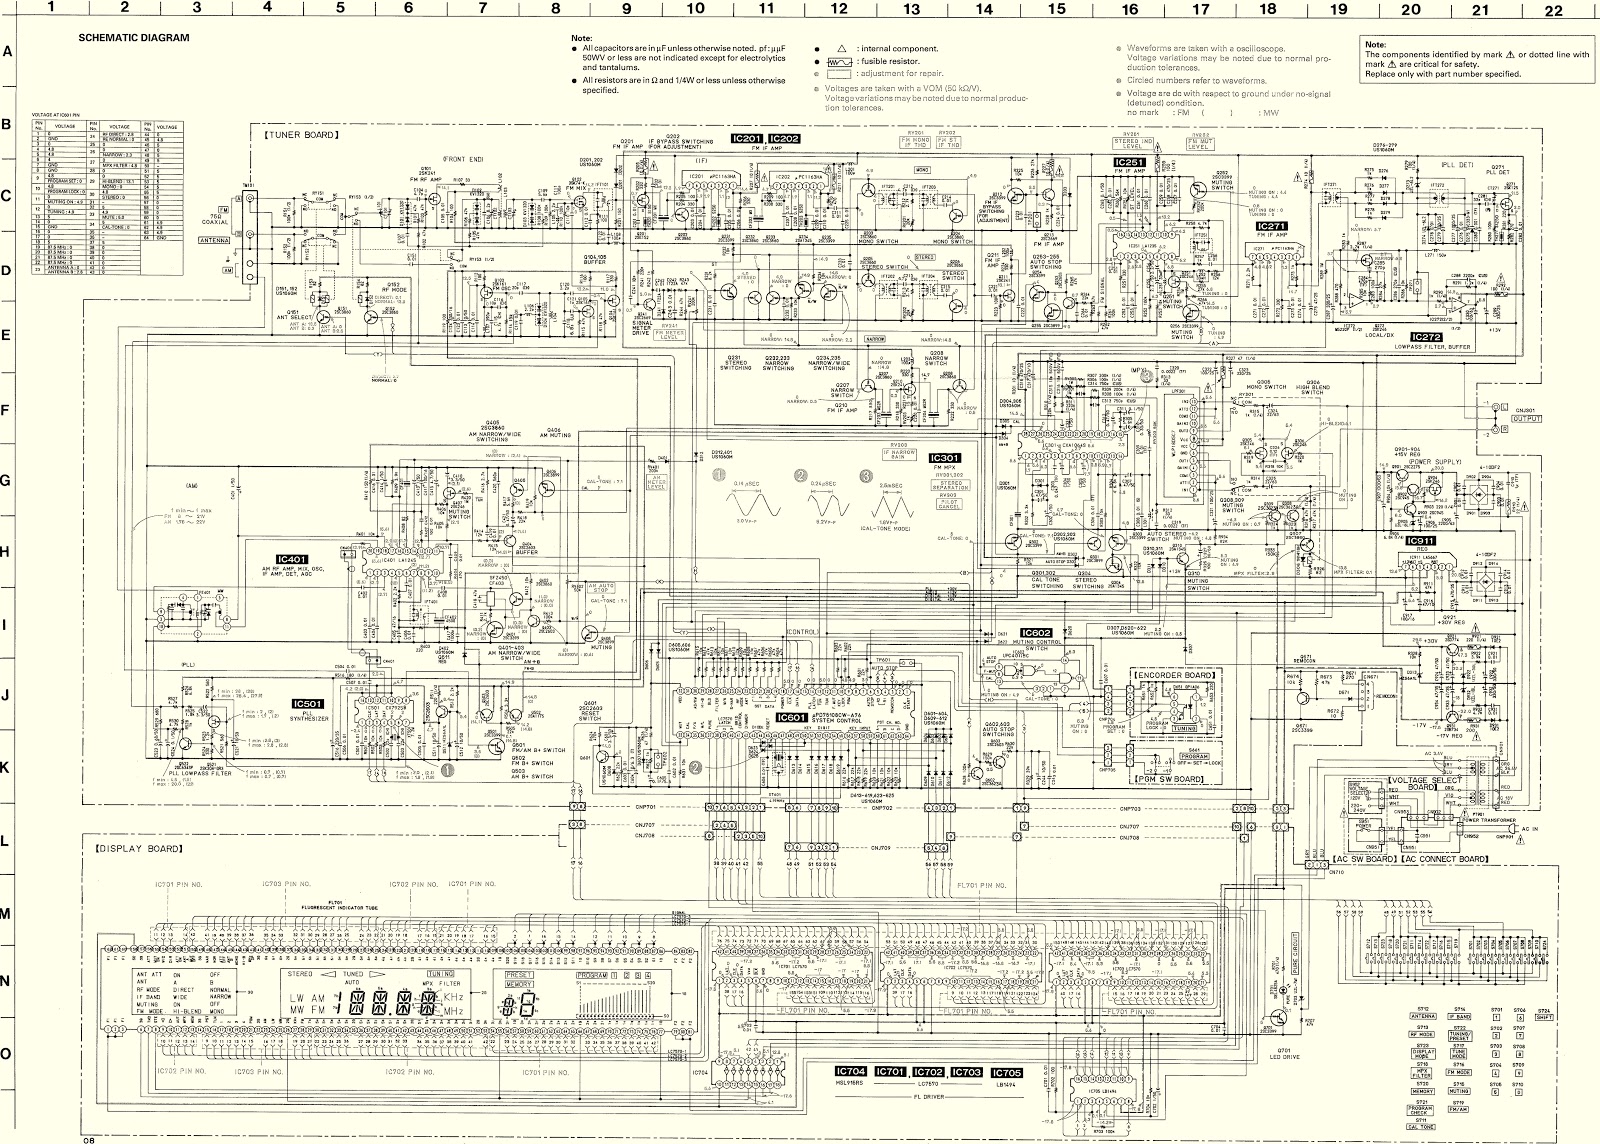 Schematic Diagrams: Sony ST S333ESG FM stereo FM/AM tuner ...